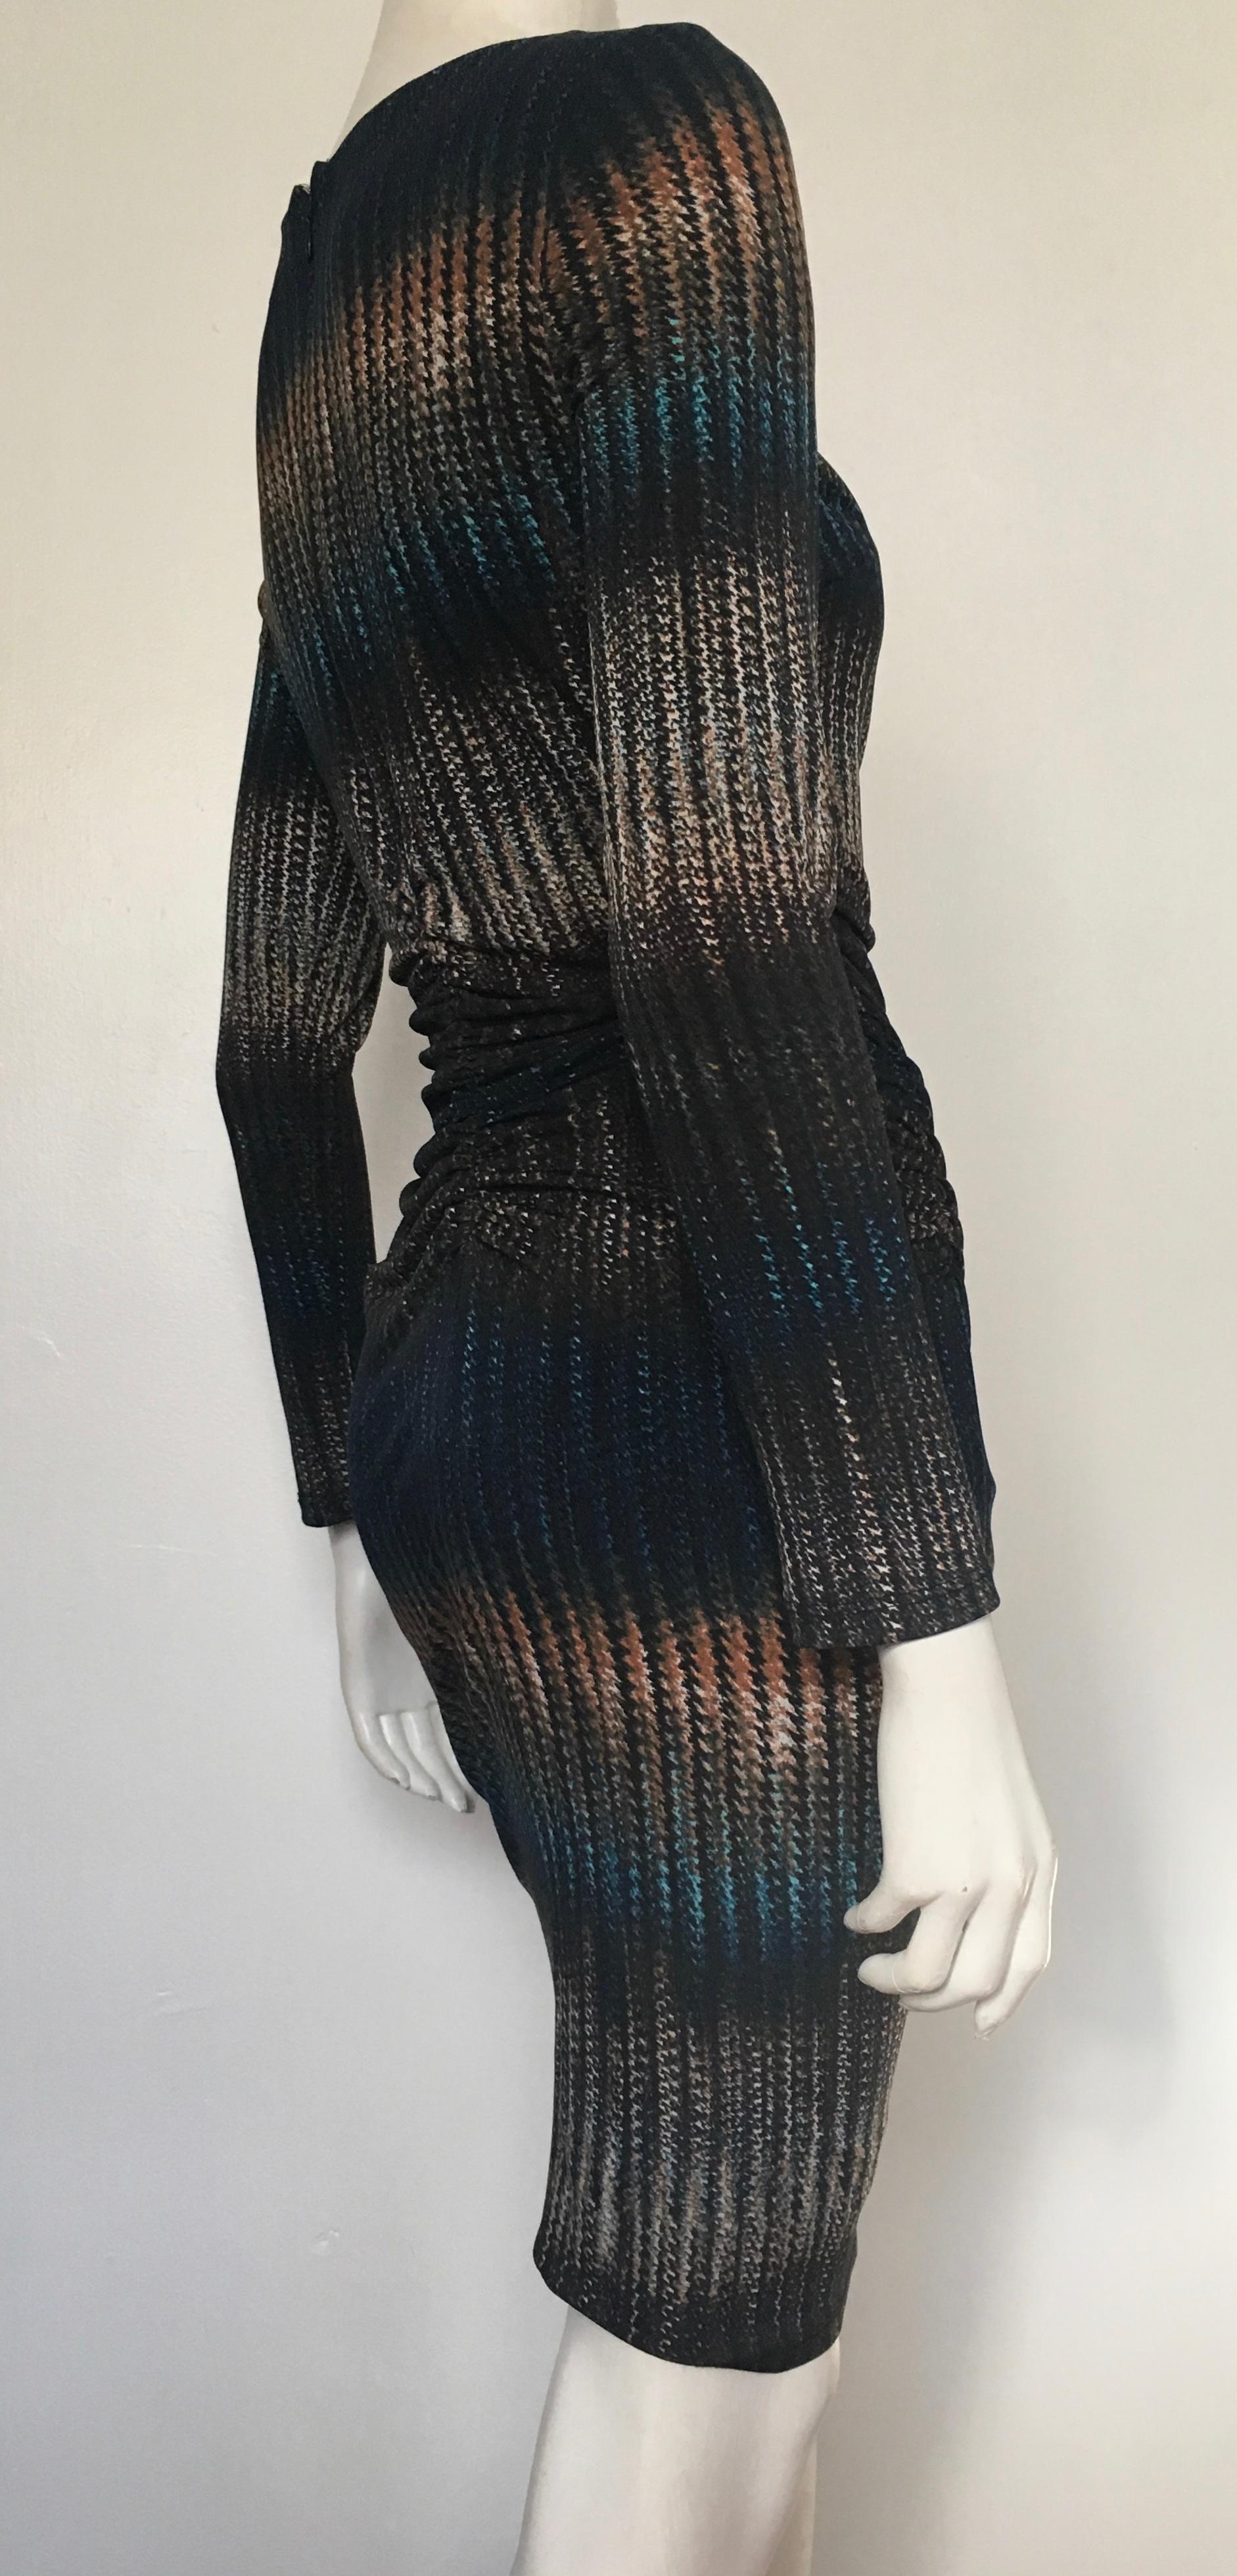 Women's or Men's Badgley Mischka Sheath Ruched Dress Size 6.  Made in Canada. 